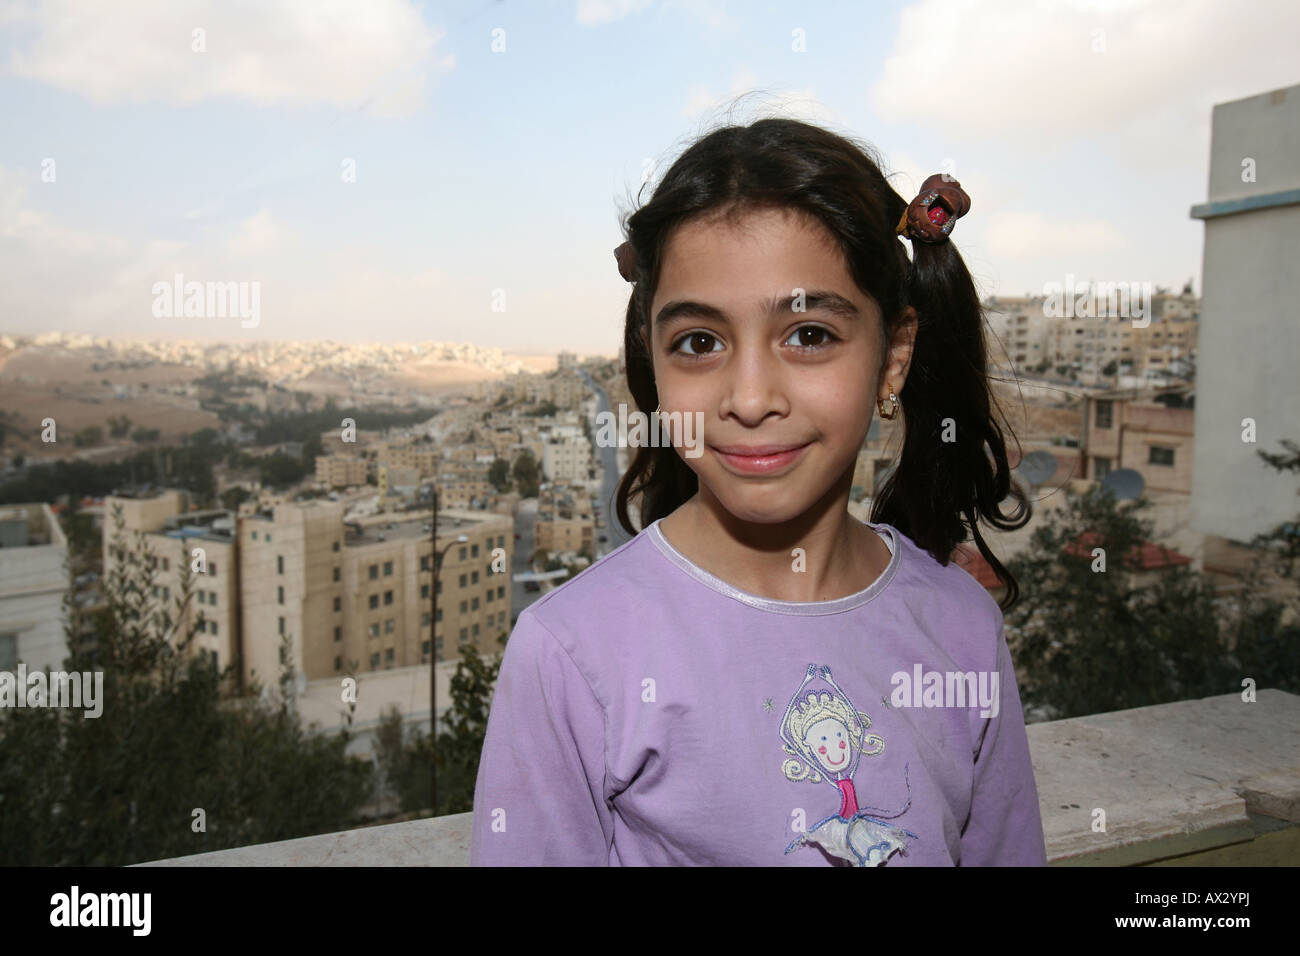 A young Iraqi girl in Amman Many Iraqi refugees have settled in Amman Jordan because of the ongoing violence in their own countr Stock Photo